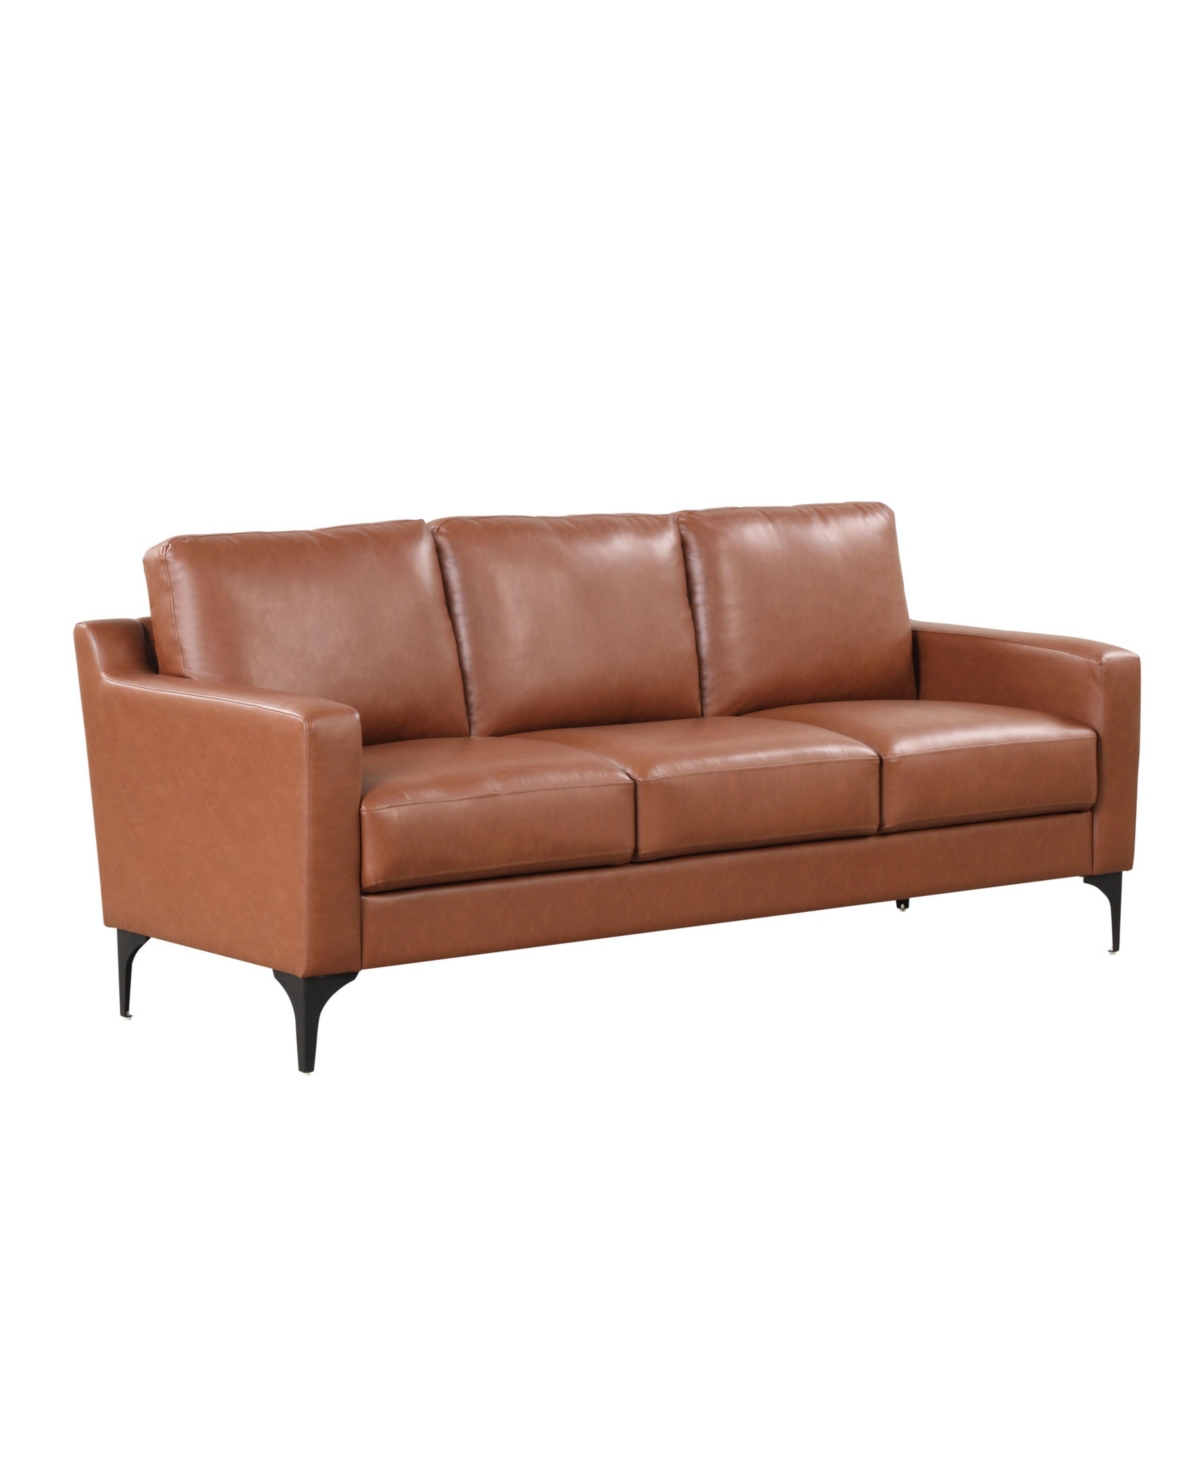 Serta 78" Faux Leather Francis Sofa In Brown